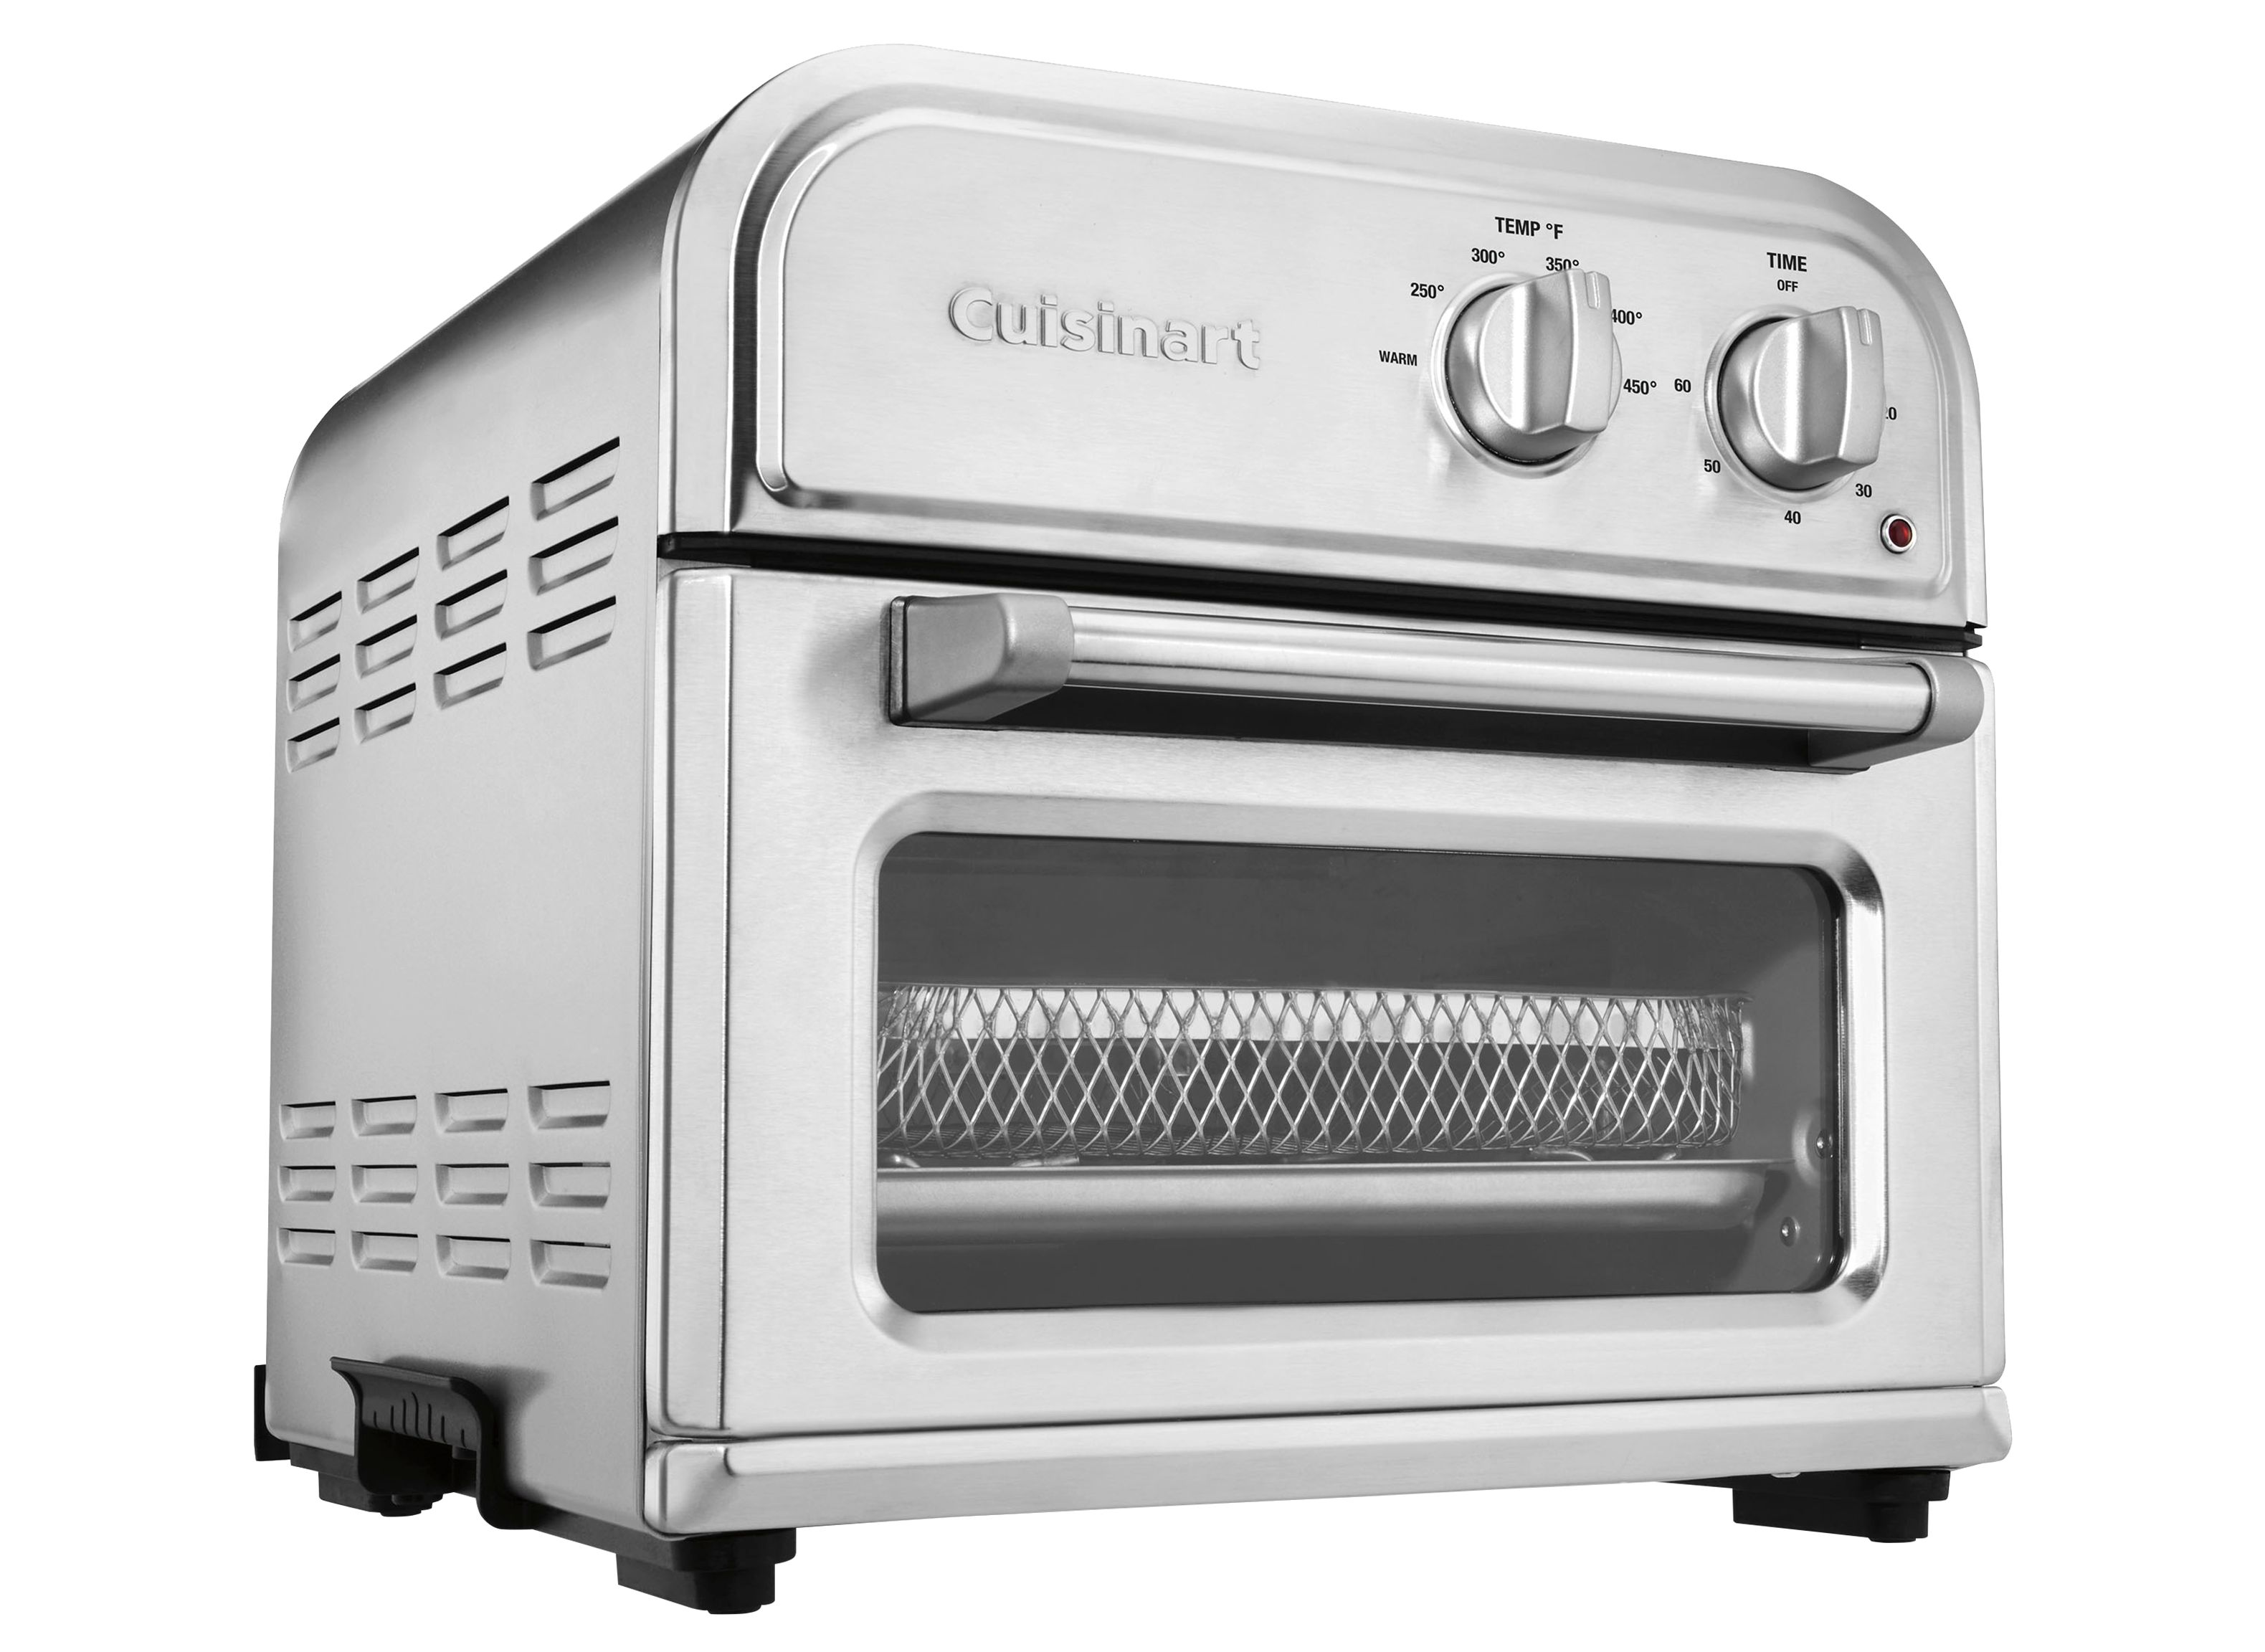 https://crdms.images.consumerreports.org/prod/products/cr/models/398430-air-fryers-cuisinart-afr-25-10004514.png